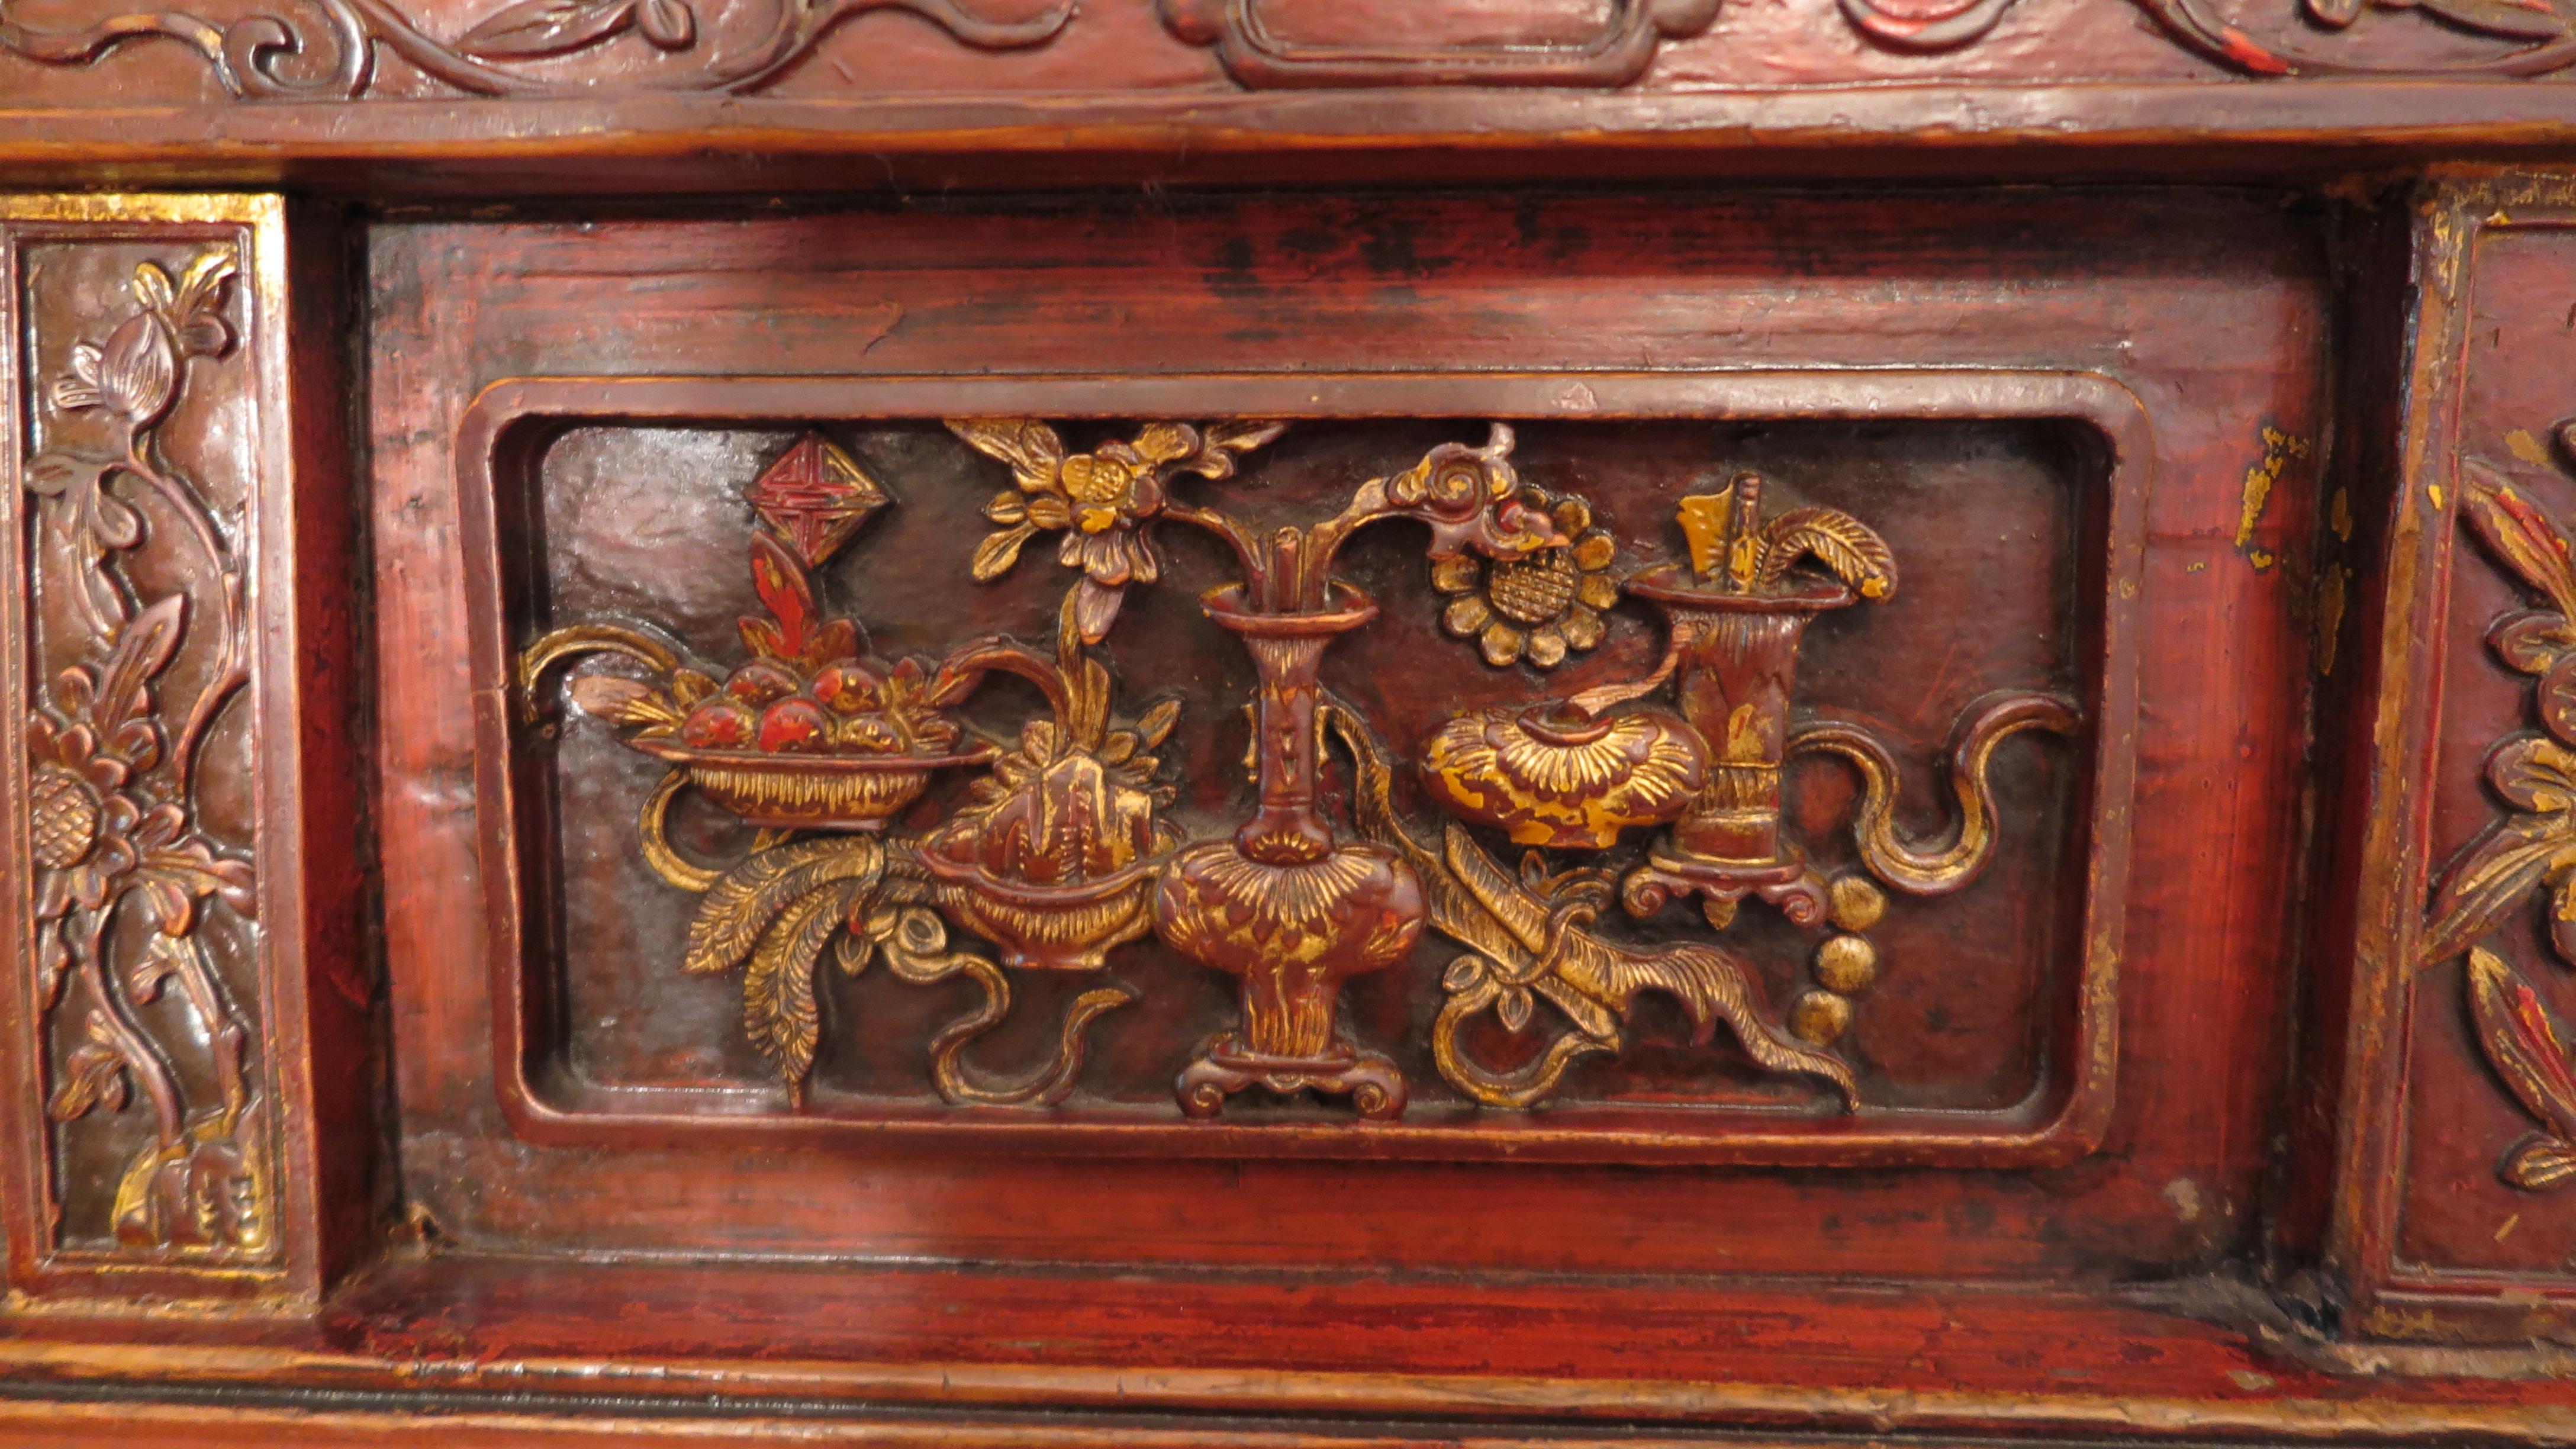 19th century carved gilded monumental Chinese Altar table. Five richly carved story board panels elaborate the apron with intricate carved figures showing through gilded red lacquer. Set underneath a solid one piece top plank with everted flanges of